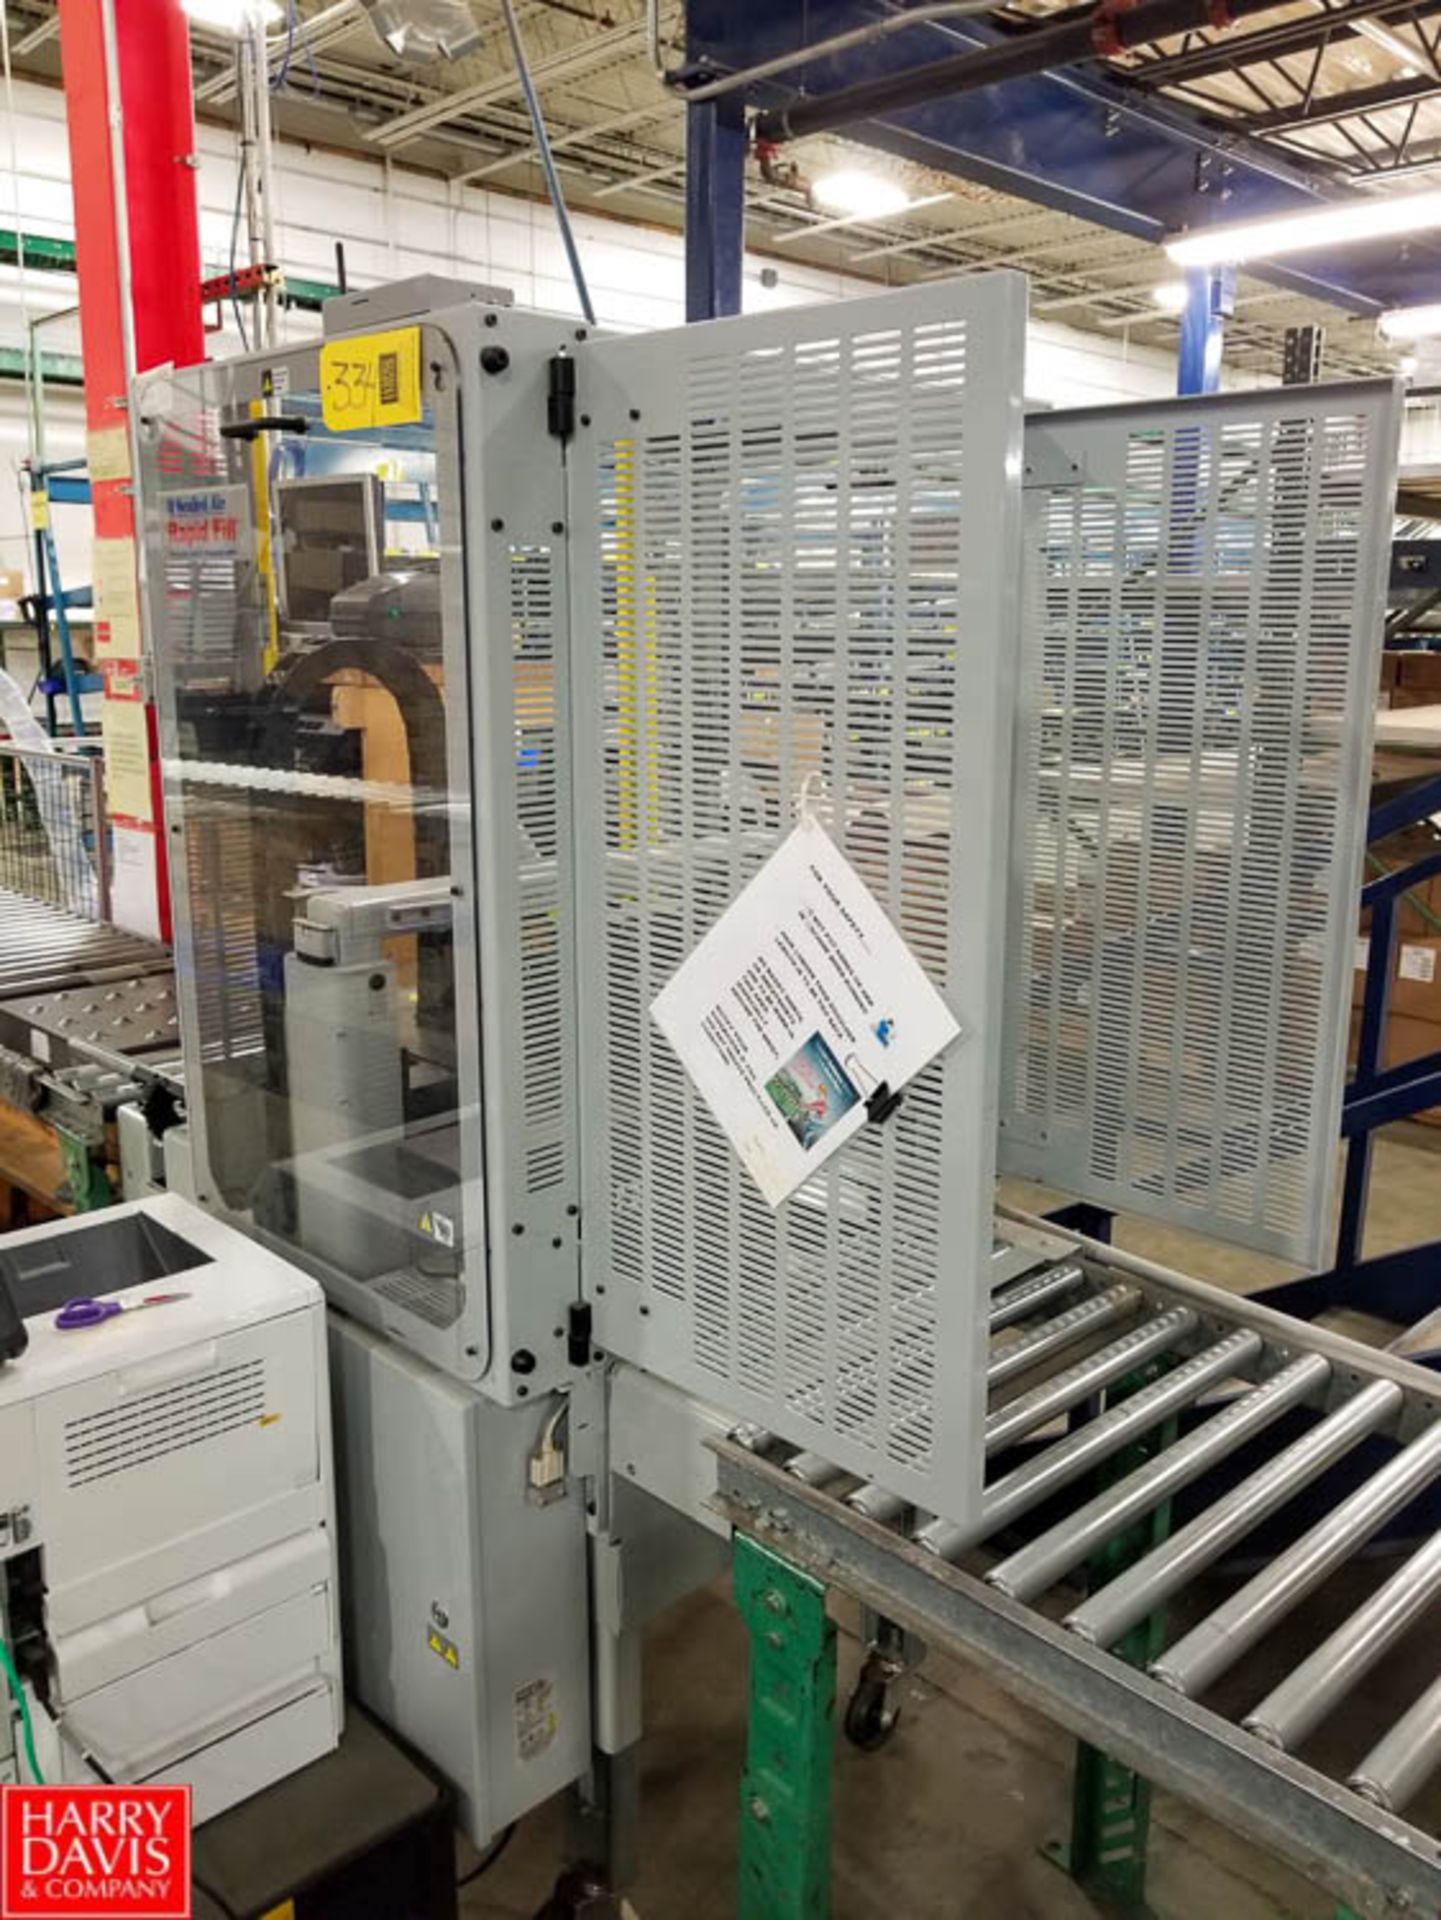 Sealed Air Automatic Void Fill Packaging System with 3M Matic Case Sealer Model: B1W1-A310-M0650- - Image 2 of 3